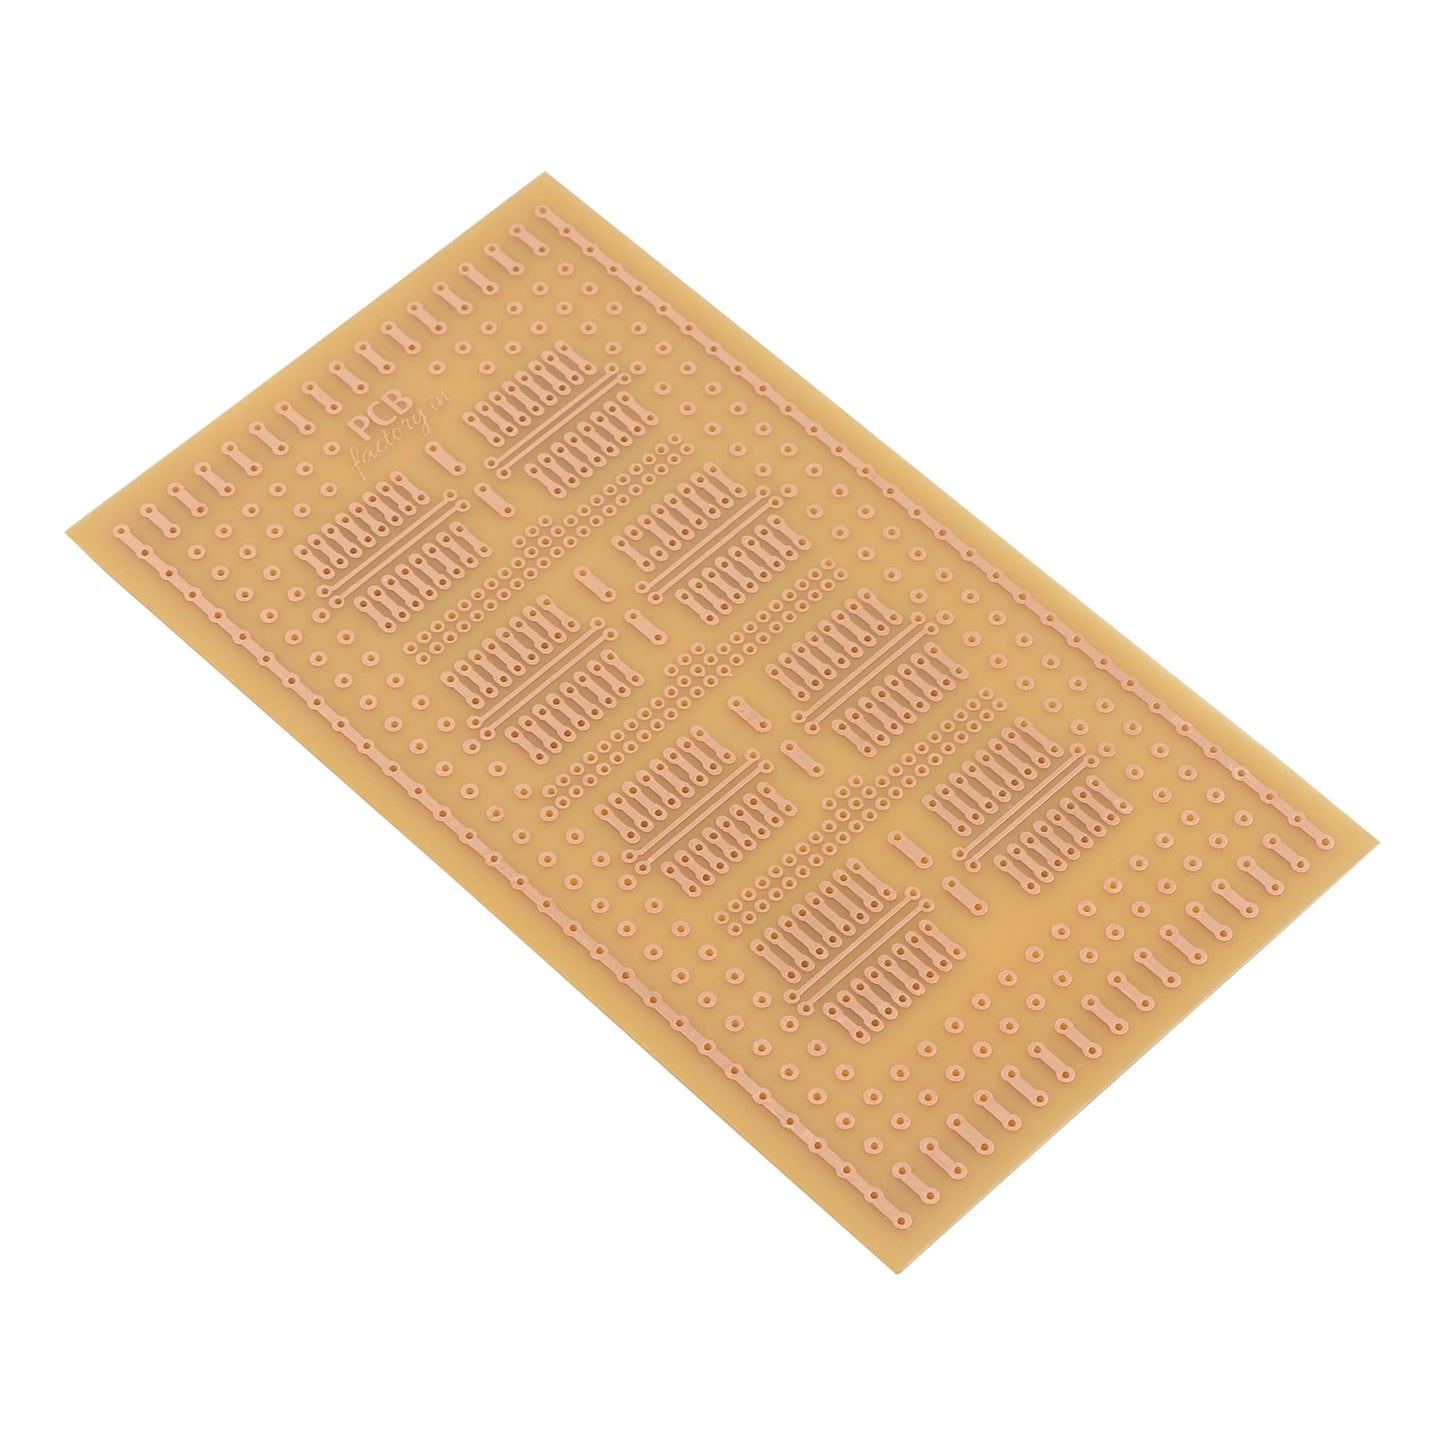 General Purpose PCB Breadboard – FR2 (Set of 5) (160mm x 90mm) – with holes